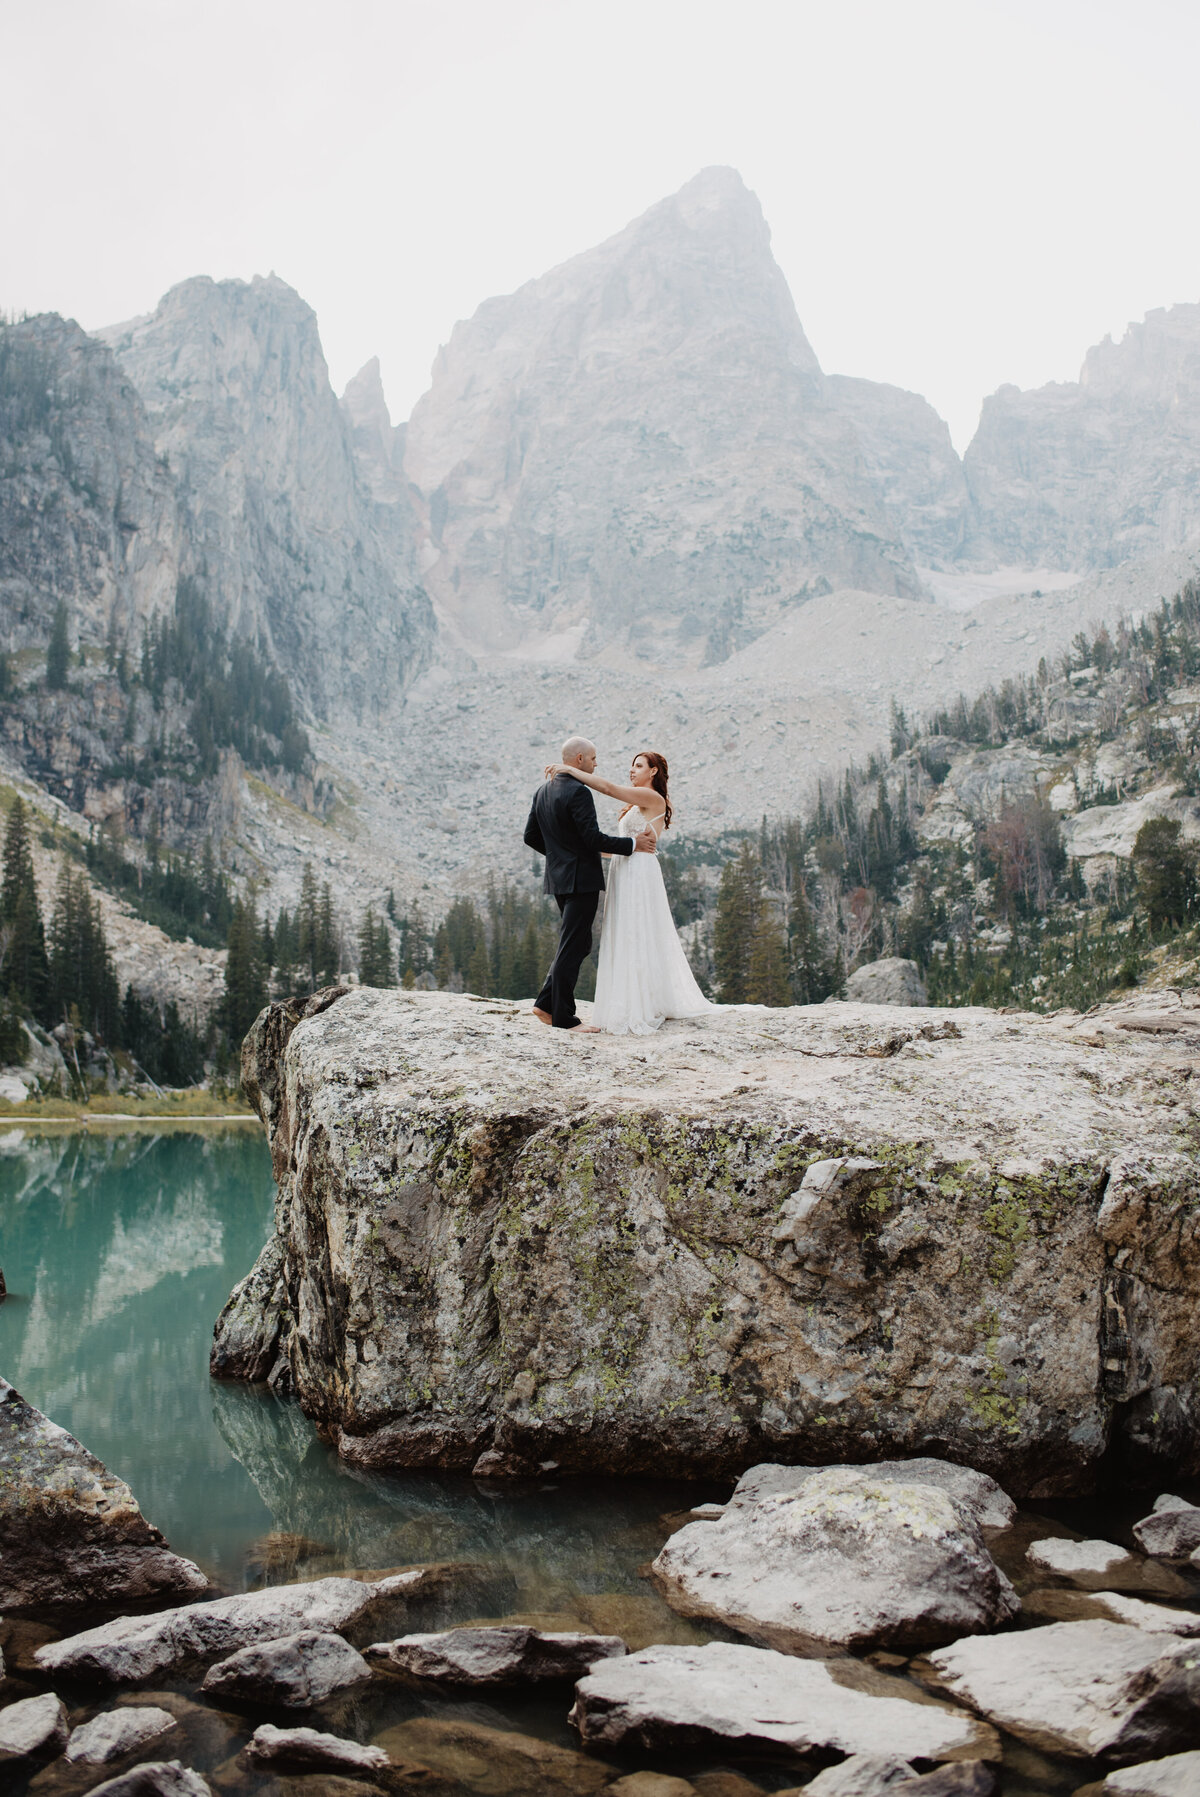 Jackson Hole photographers capture bride and groom looking at one another